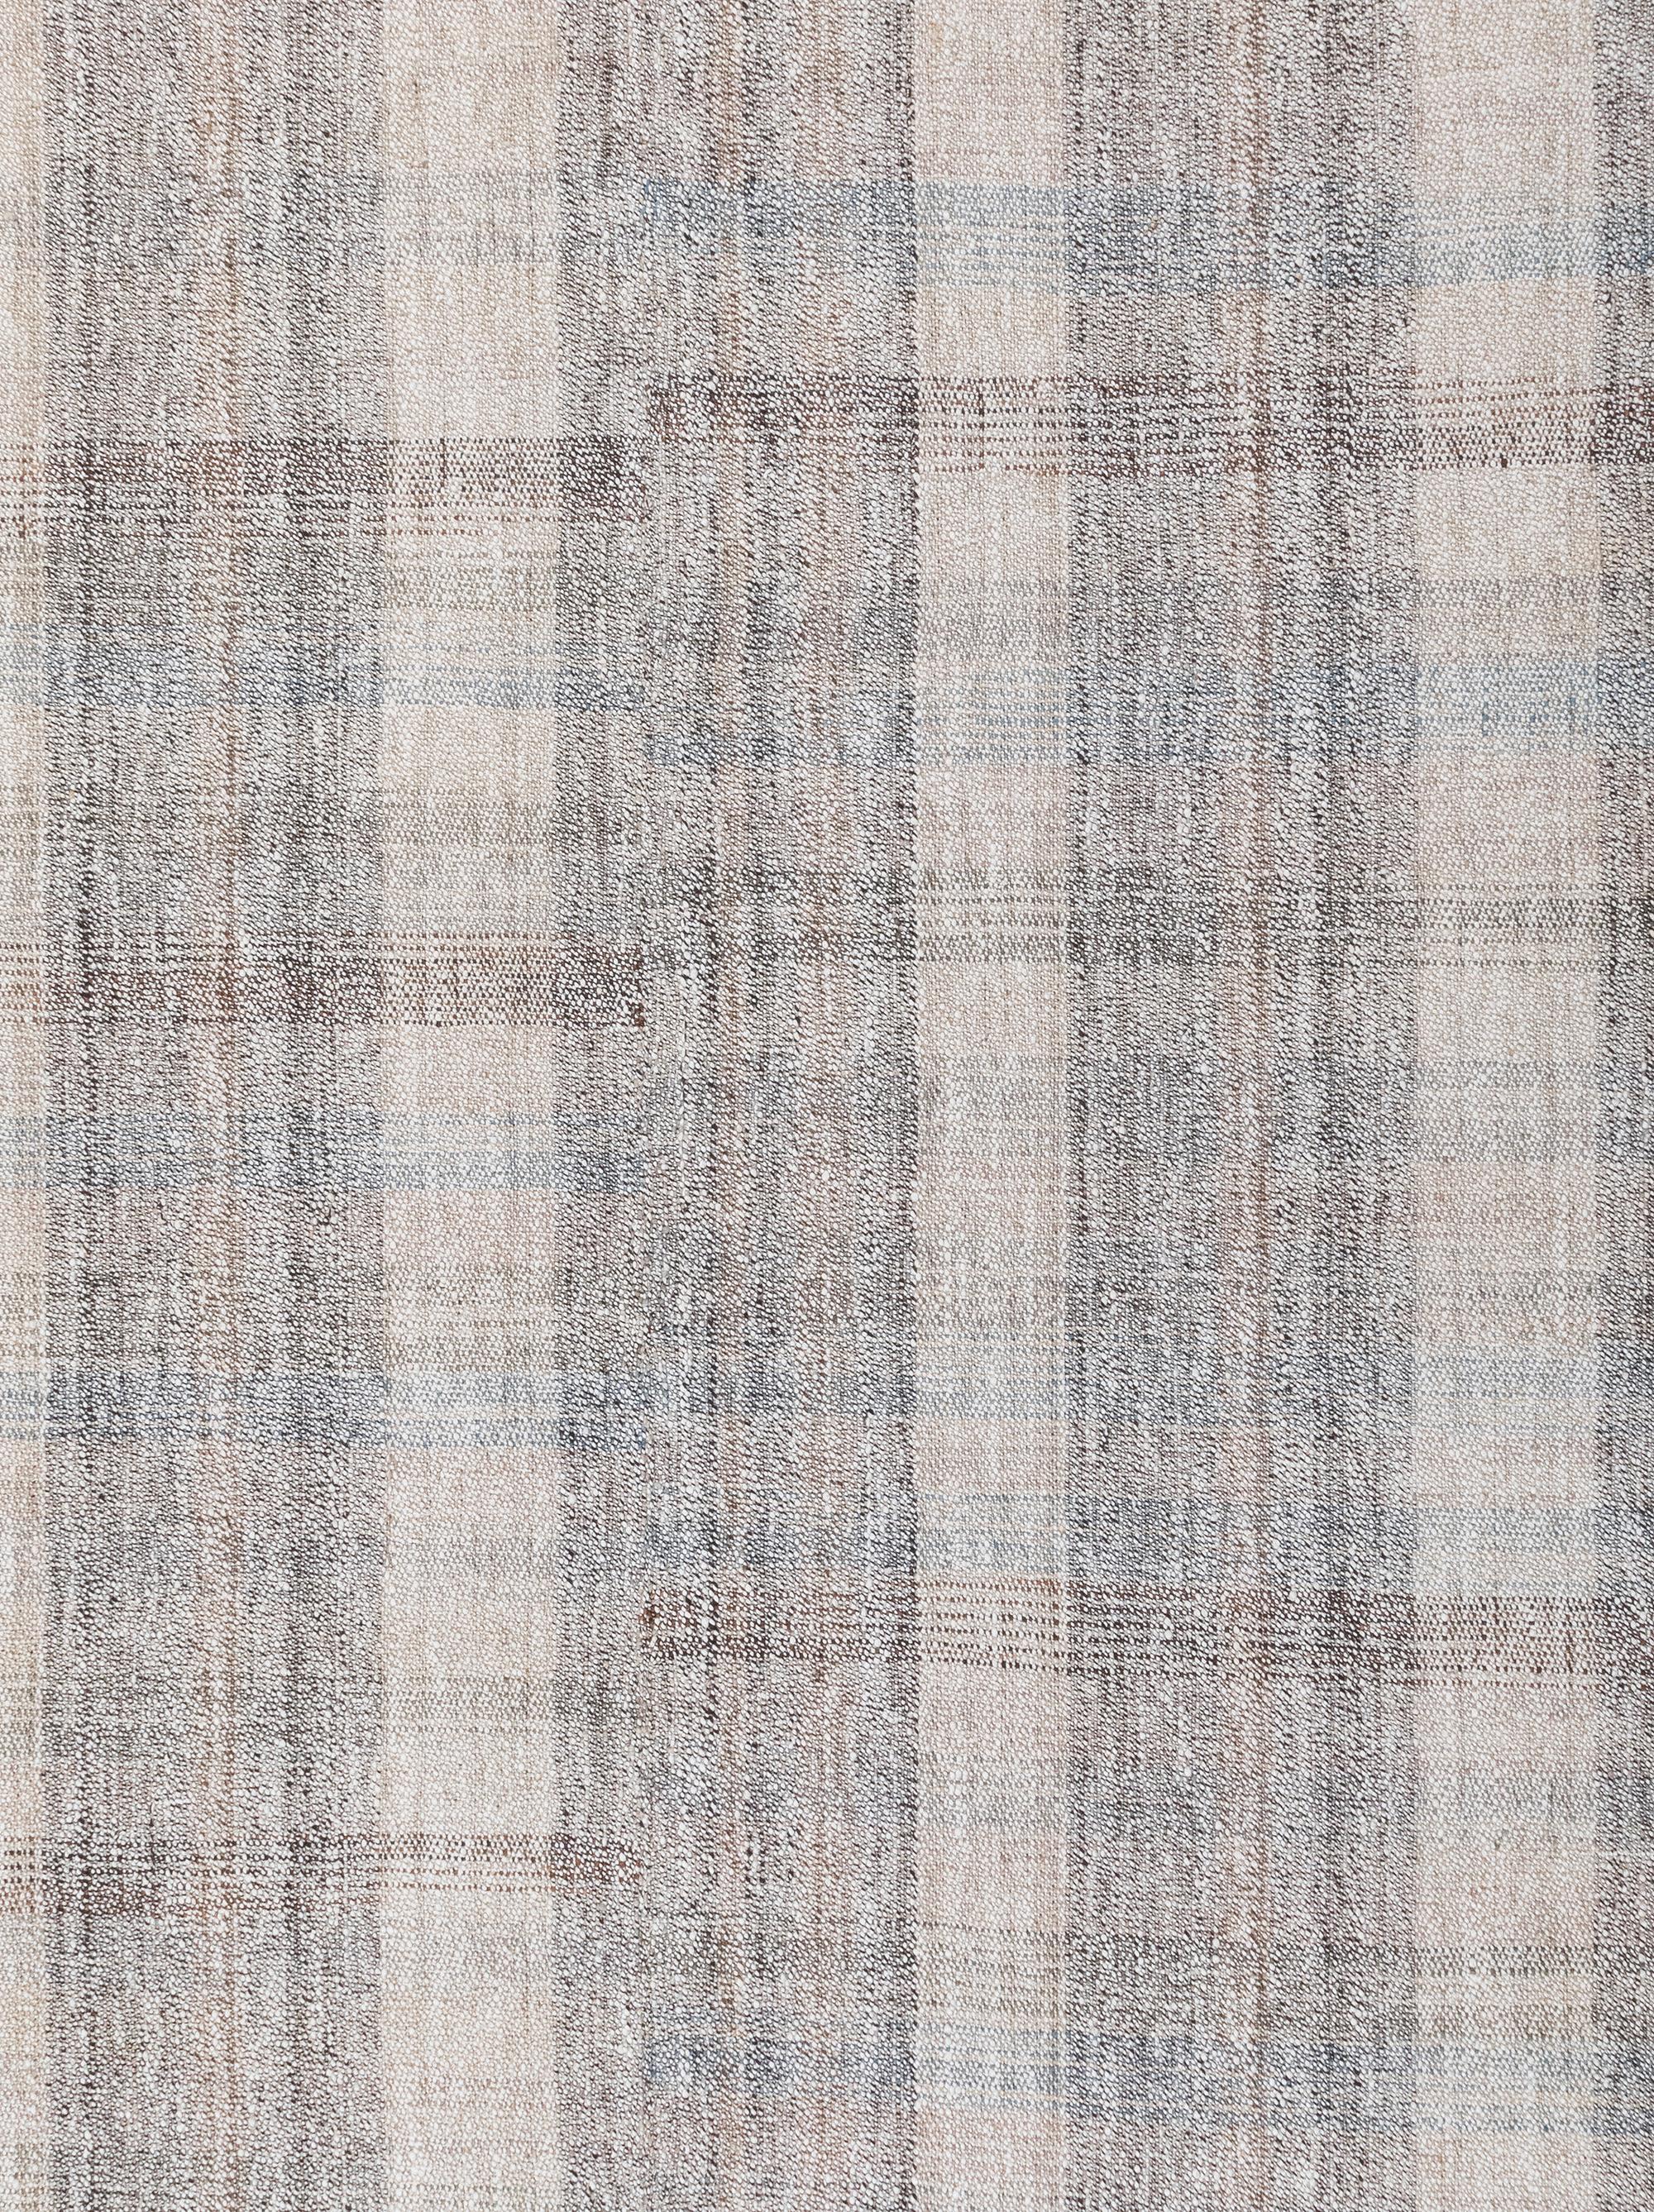 This flatweave rug is made with handspun wool and cotton, and natural dyes.  It is inspired by the antique kilims that are native to the Kurdish region in Iran.  NASIRI continues their rich tradition of rug making by applying the same techniques and